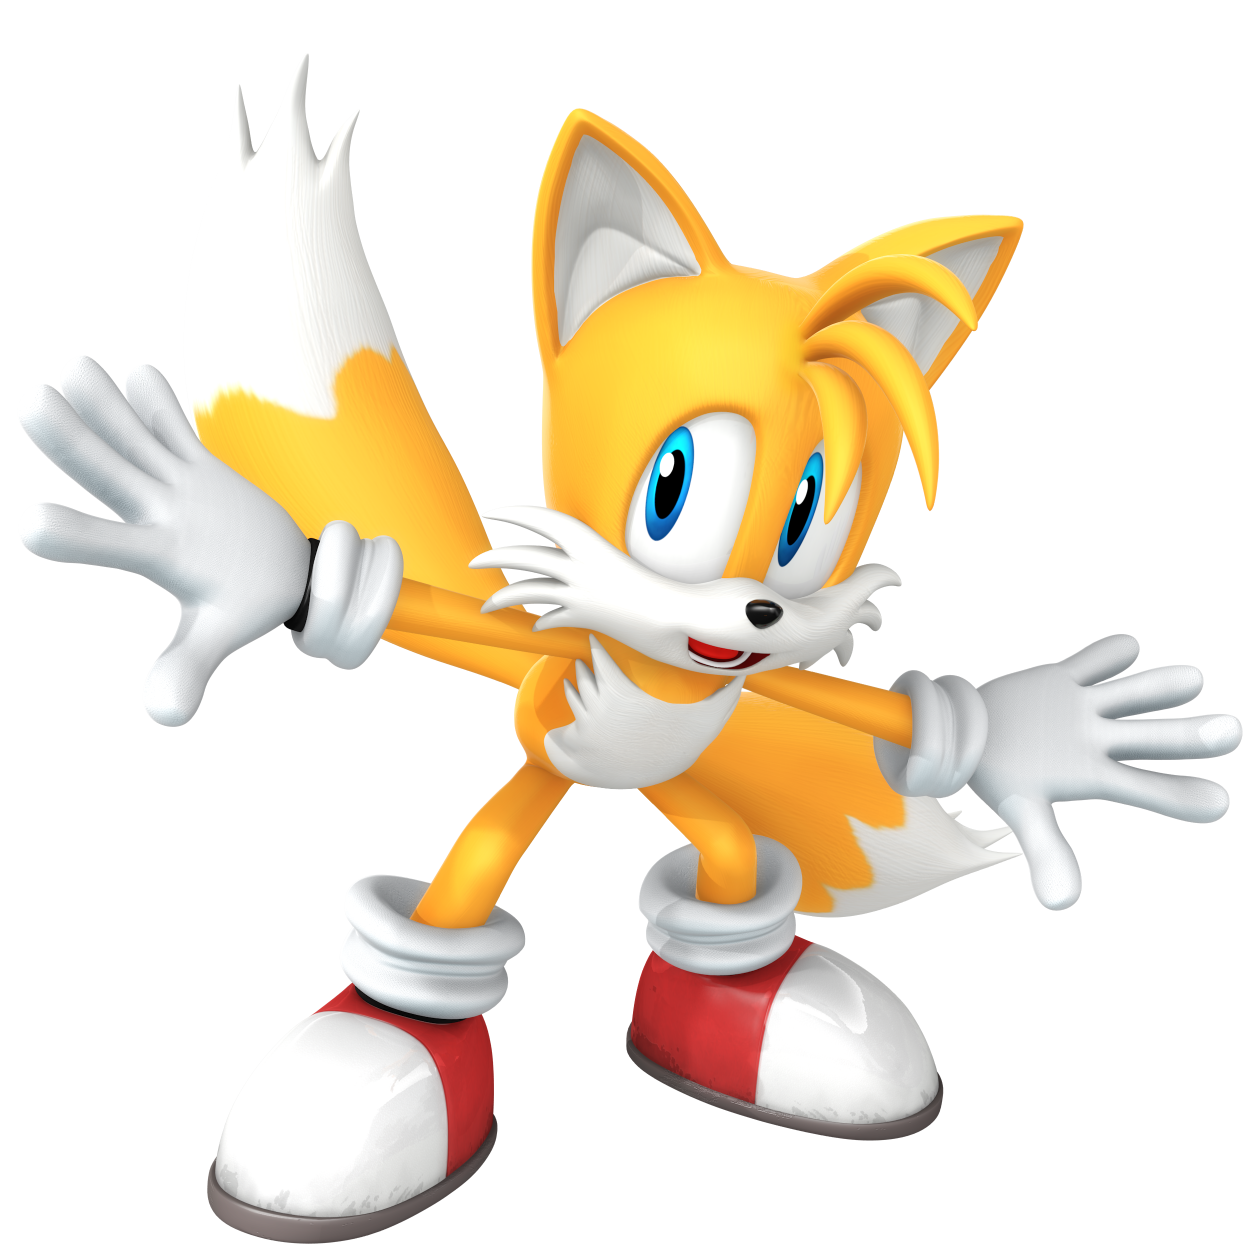 High Quality Re-render: Tails Blank Meme Template